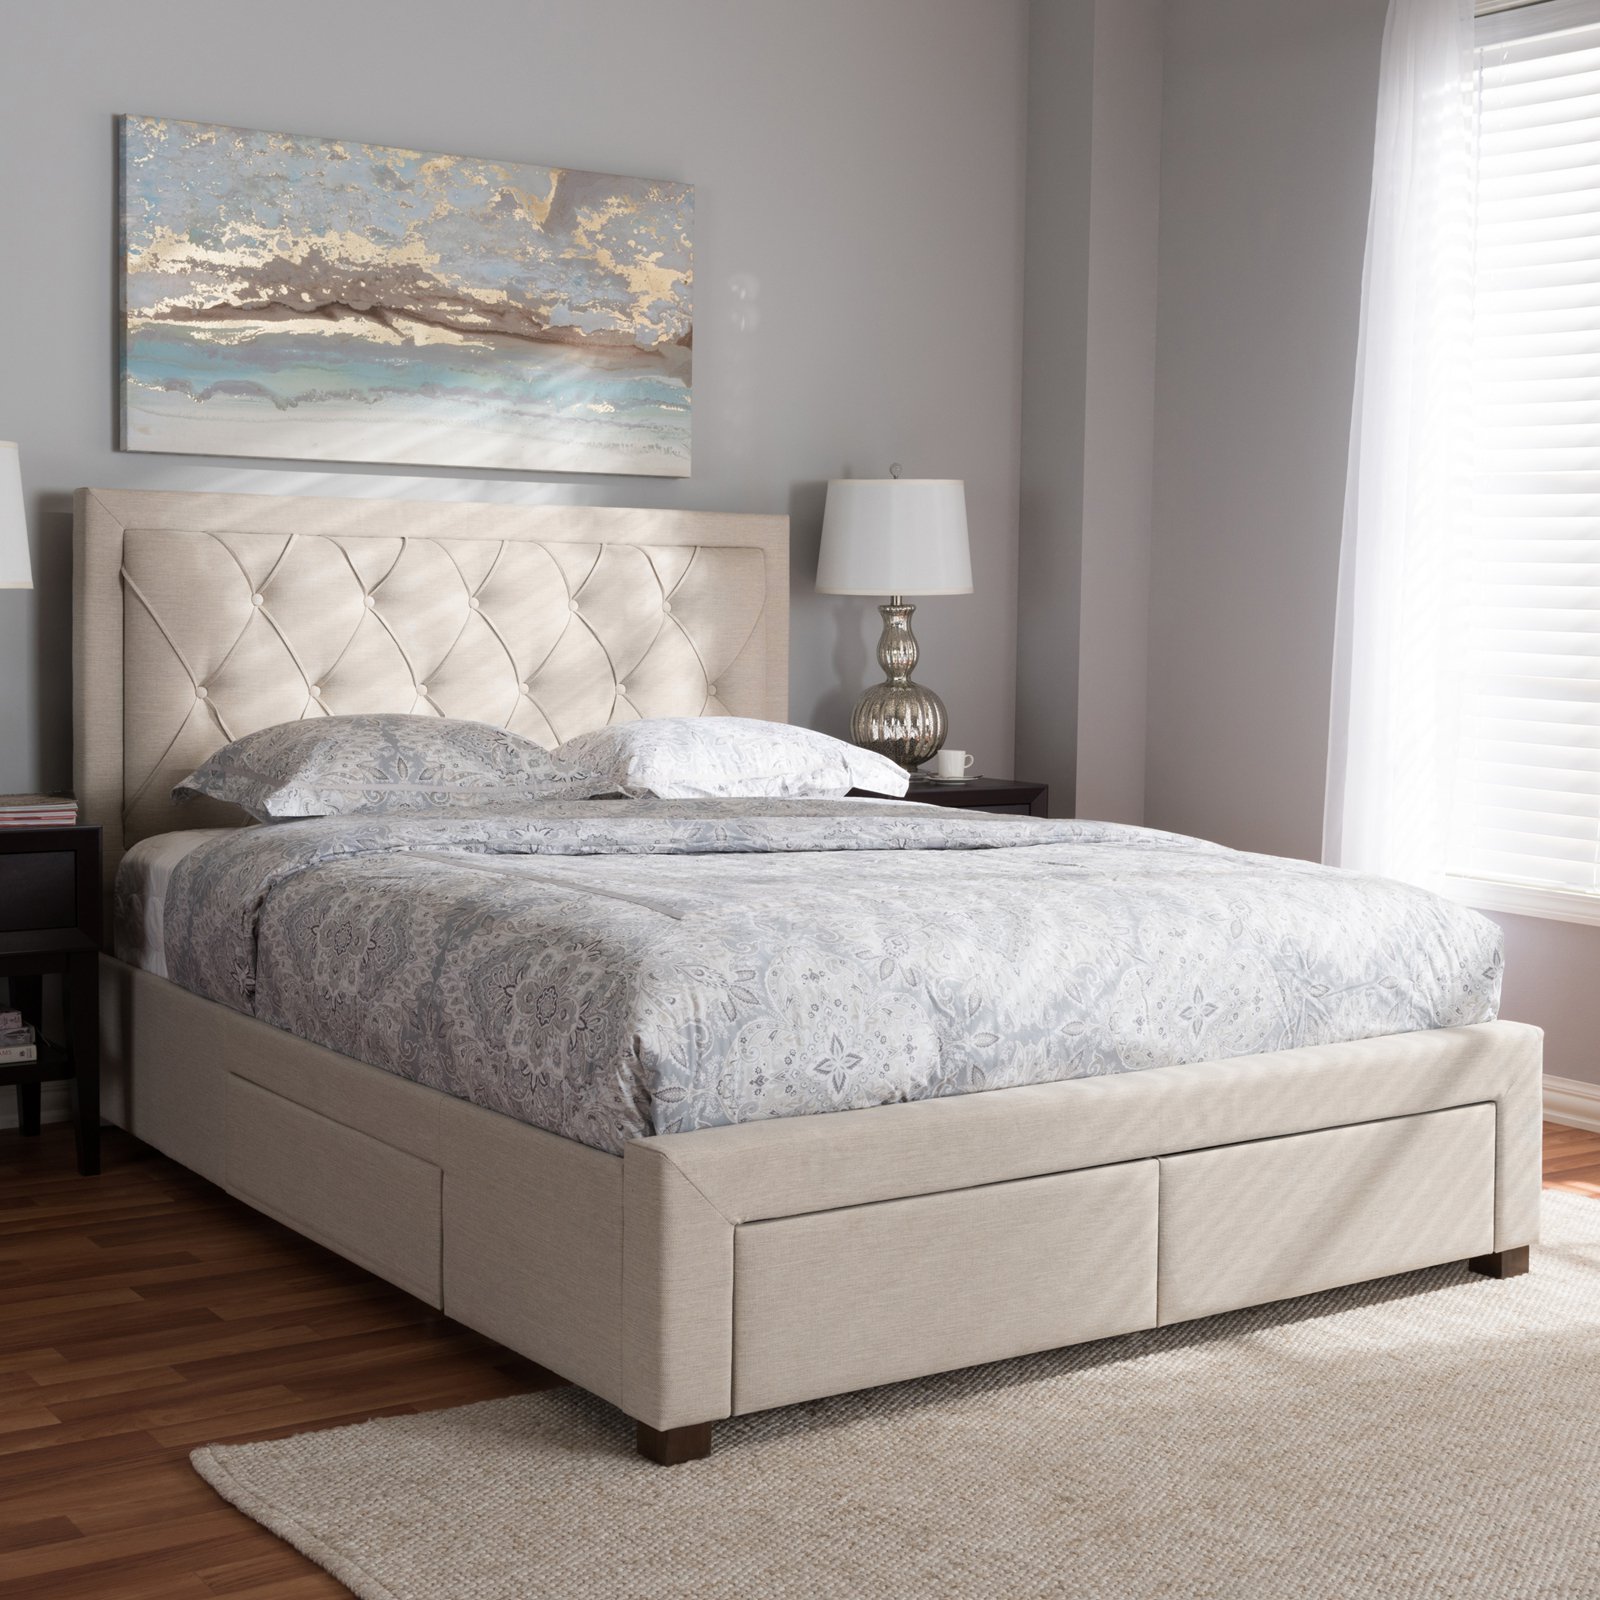 Baxton Studio Aurelie Modern and Contemporary Fabric Upholstered Storage Bed, Multiple Colors, Multiple Sizes - image 2 of 2